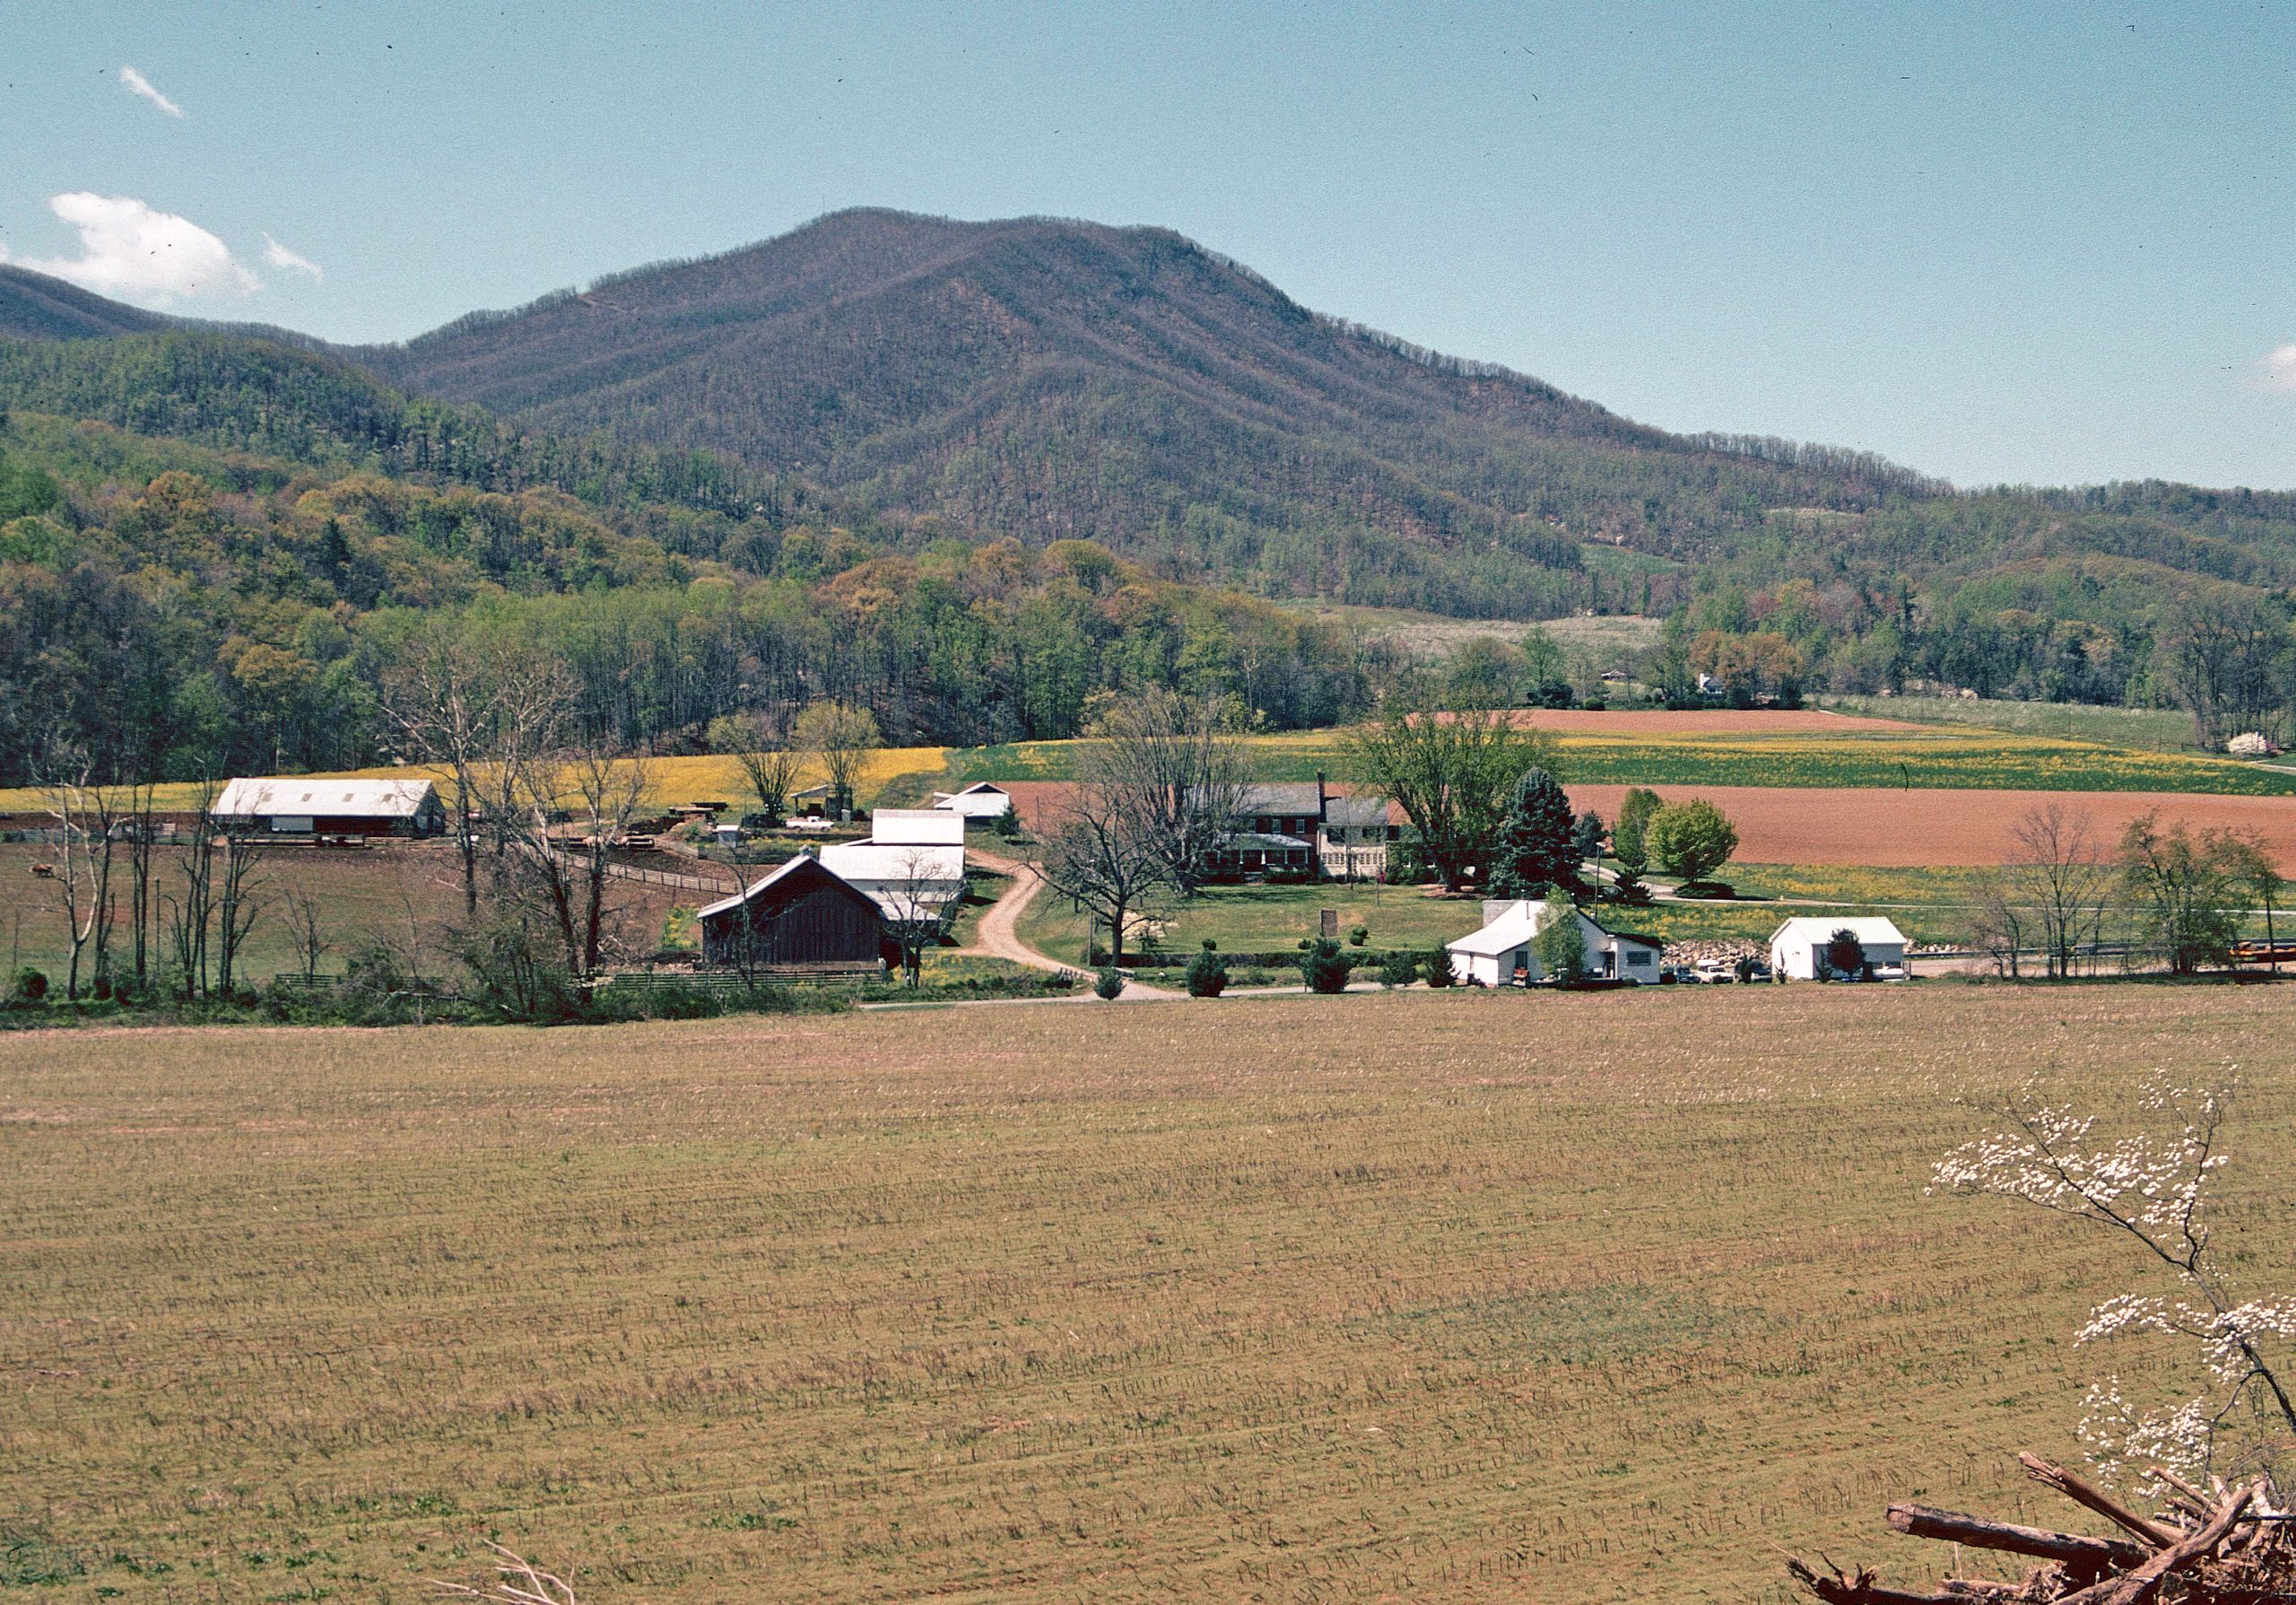 Cahas Mountain Rural Historic District